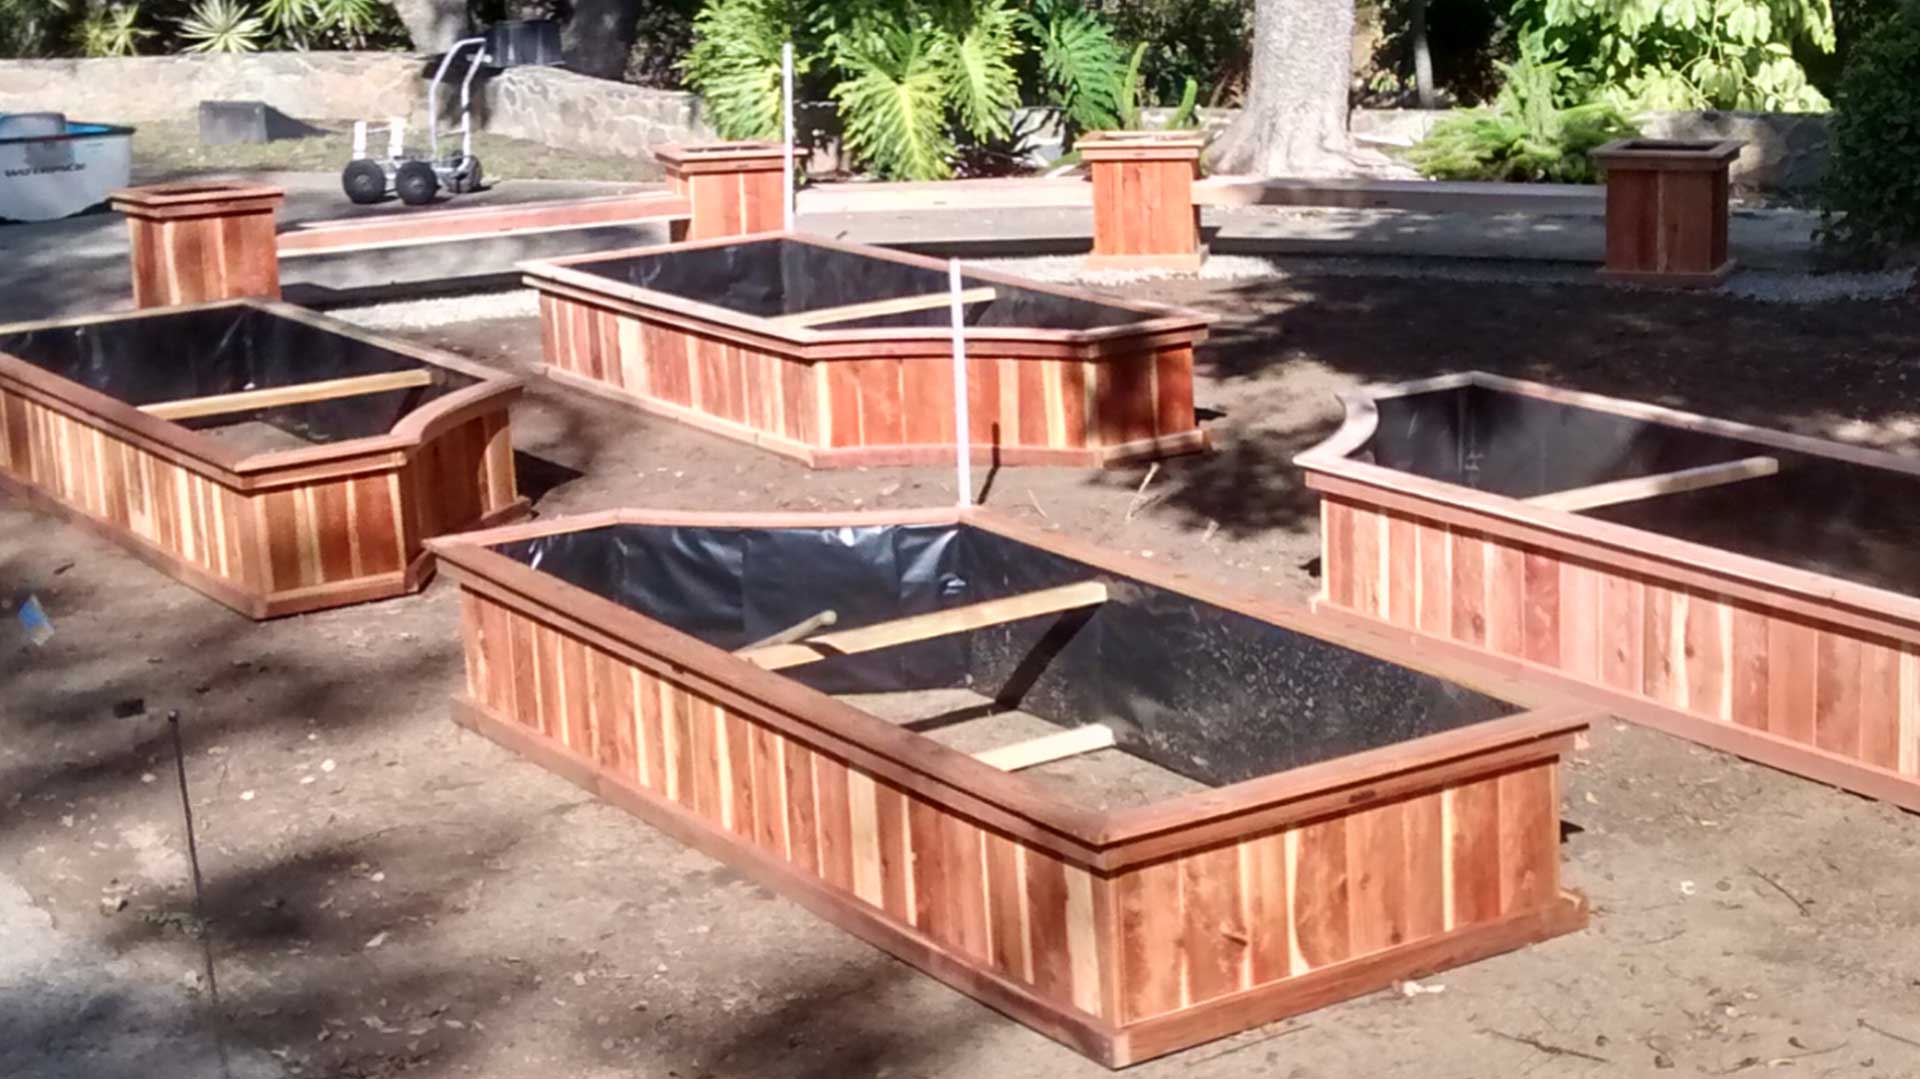 A group of wooden raised garden beds in a yard.